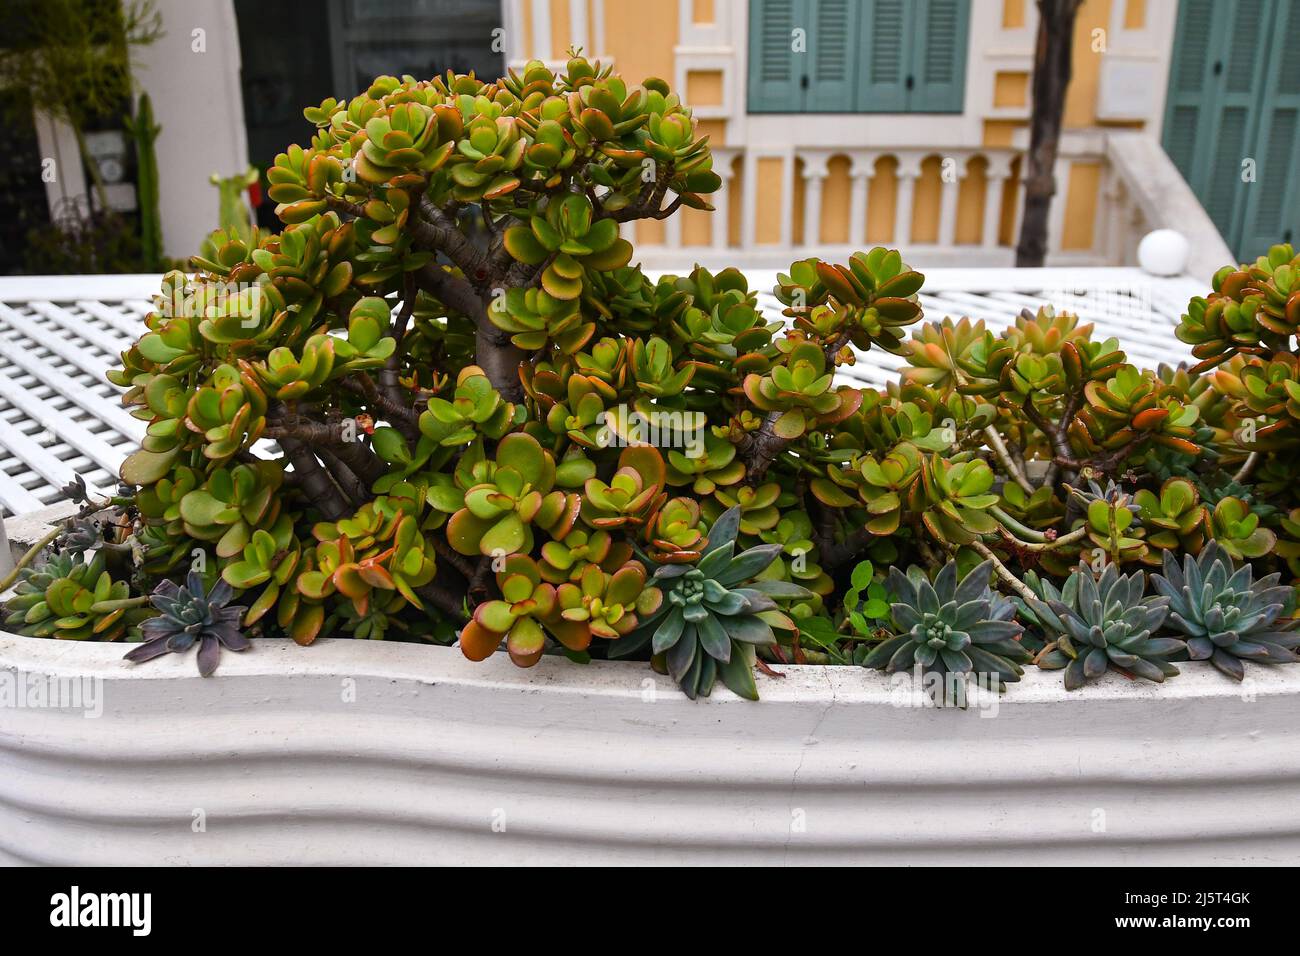 Close-up of Crassula succulent plants in a white pot on the terrace of a house, Sanremo, Imperia, Liguria, Italy Stock Photo